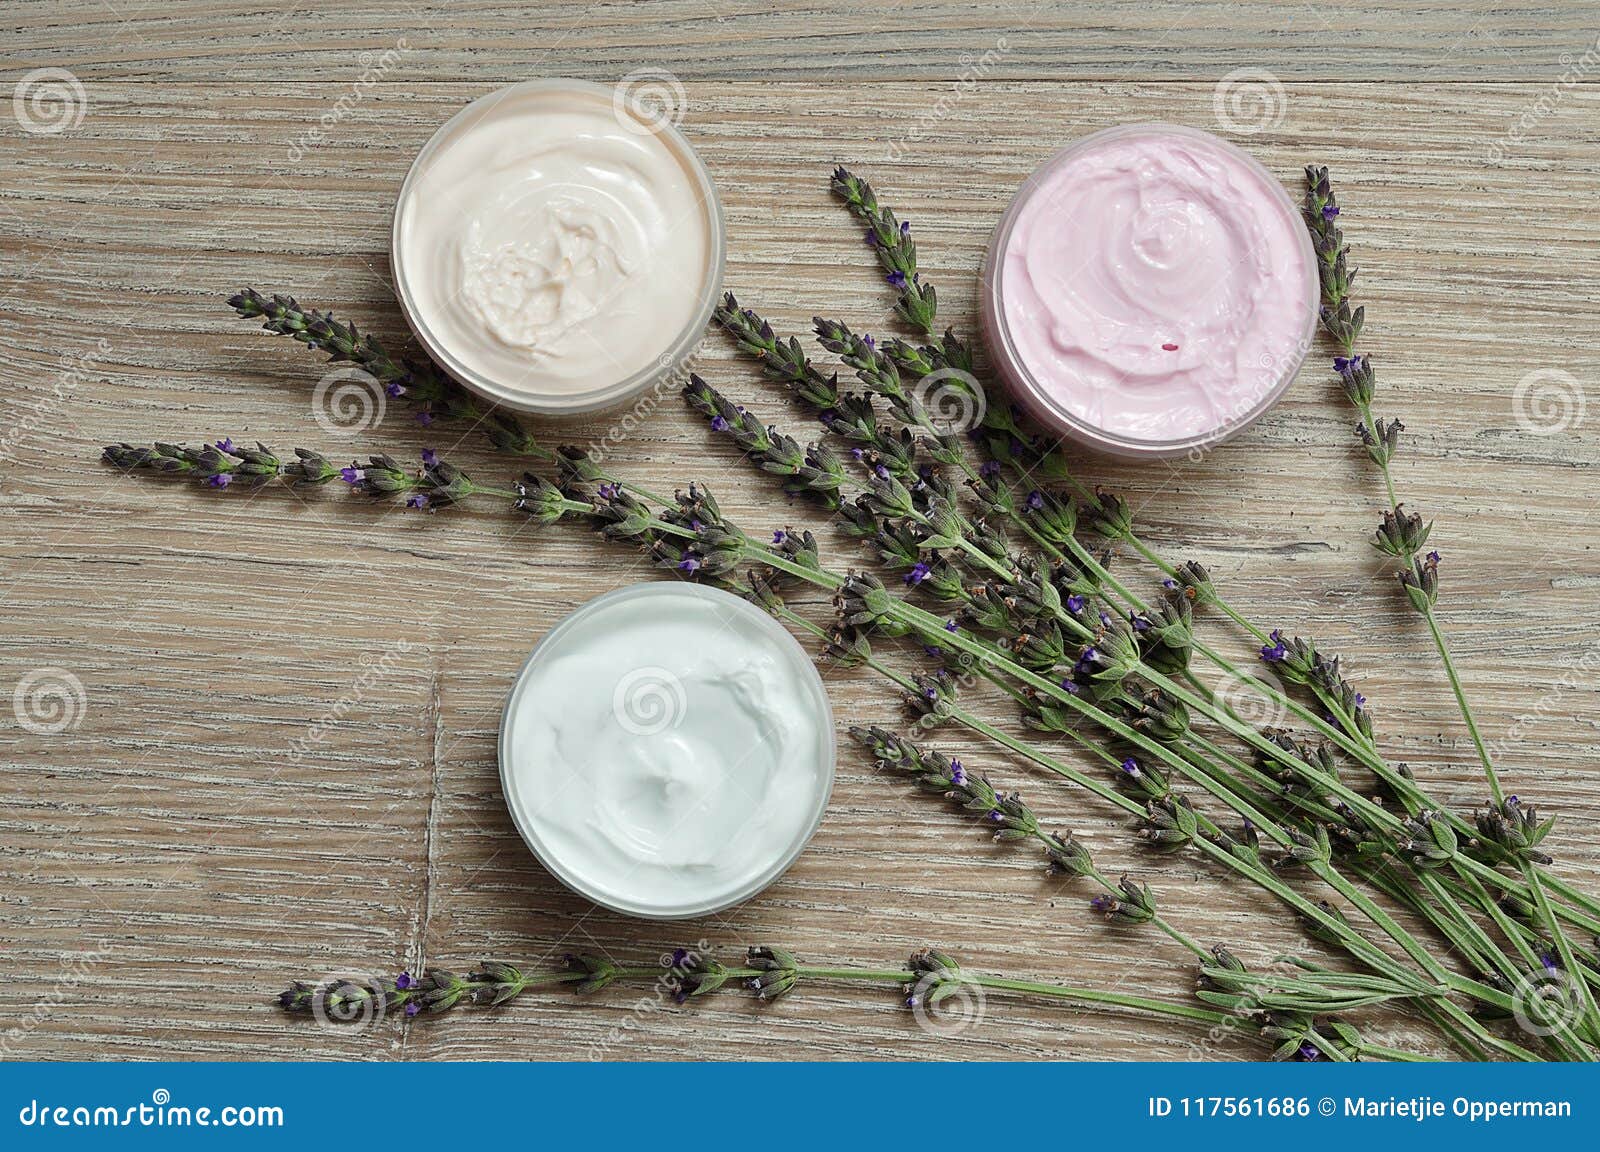 a bunch of lavender displayed with containers of body lotion